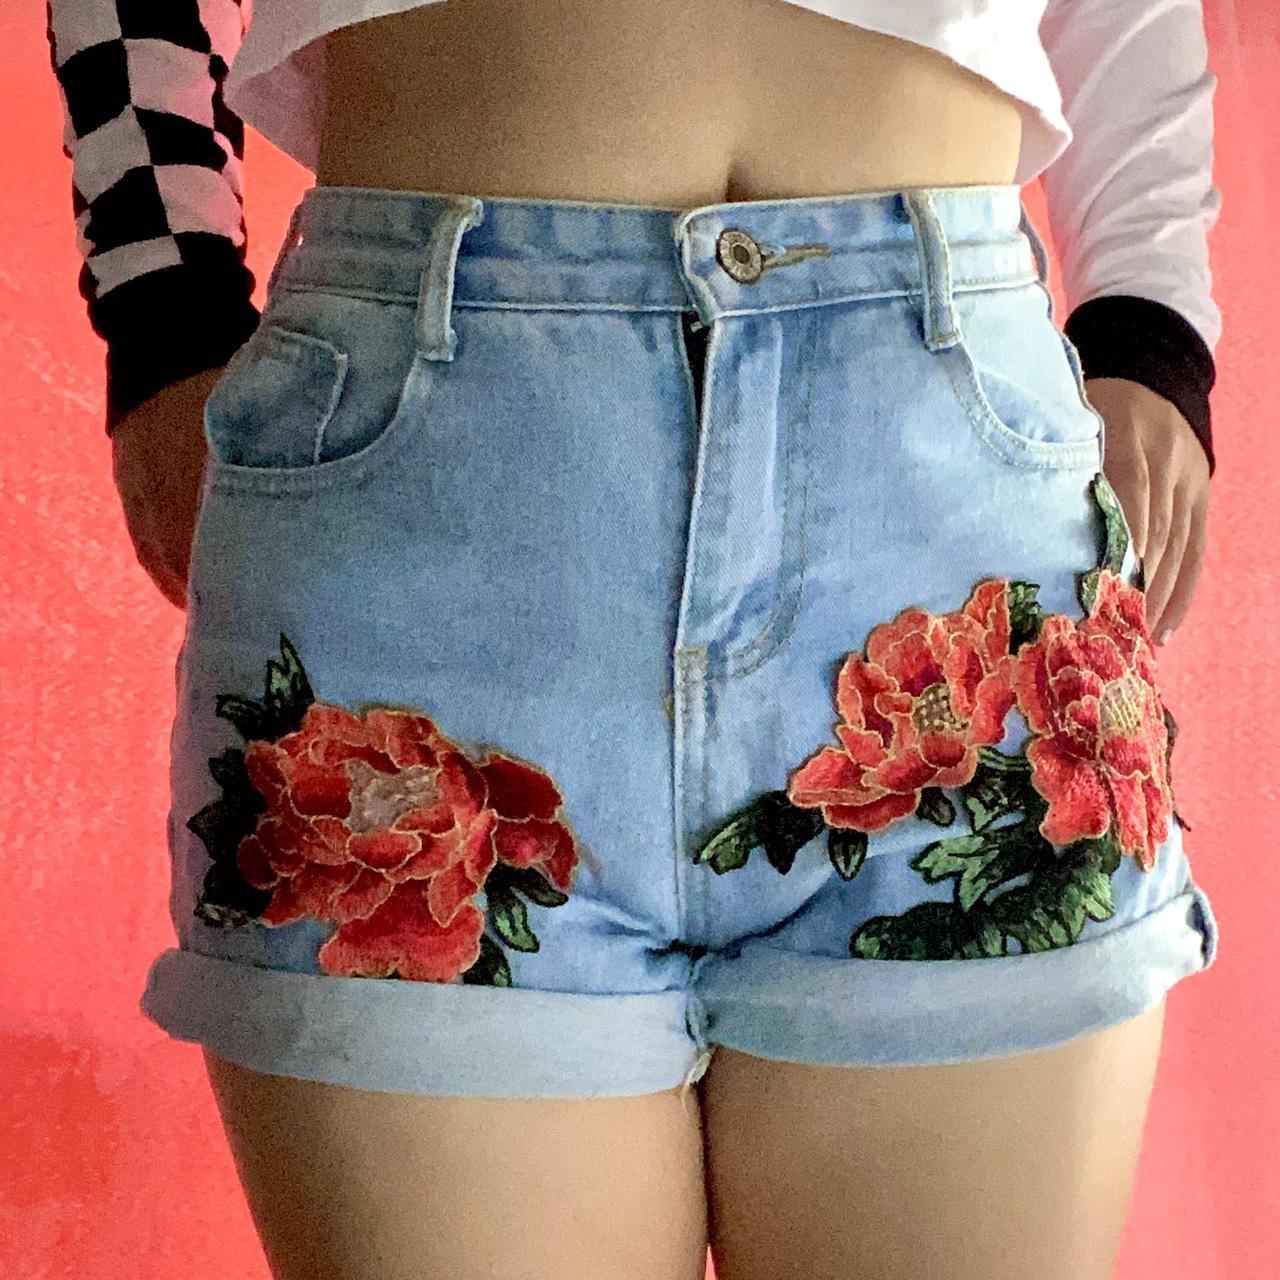 Product Image 1 - Floral Embroidered Denim Shorts

[CONDITION]
Like new!

[SIZE]
Small
Waist: